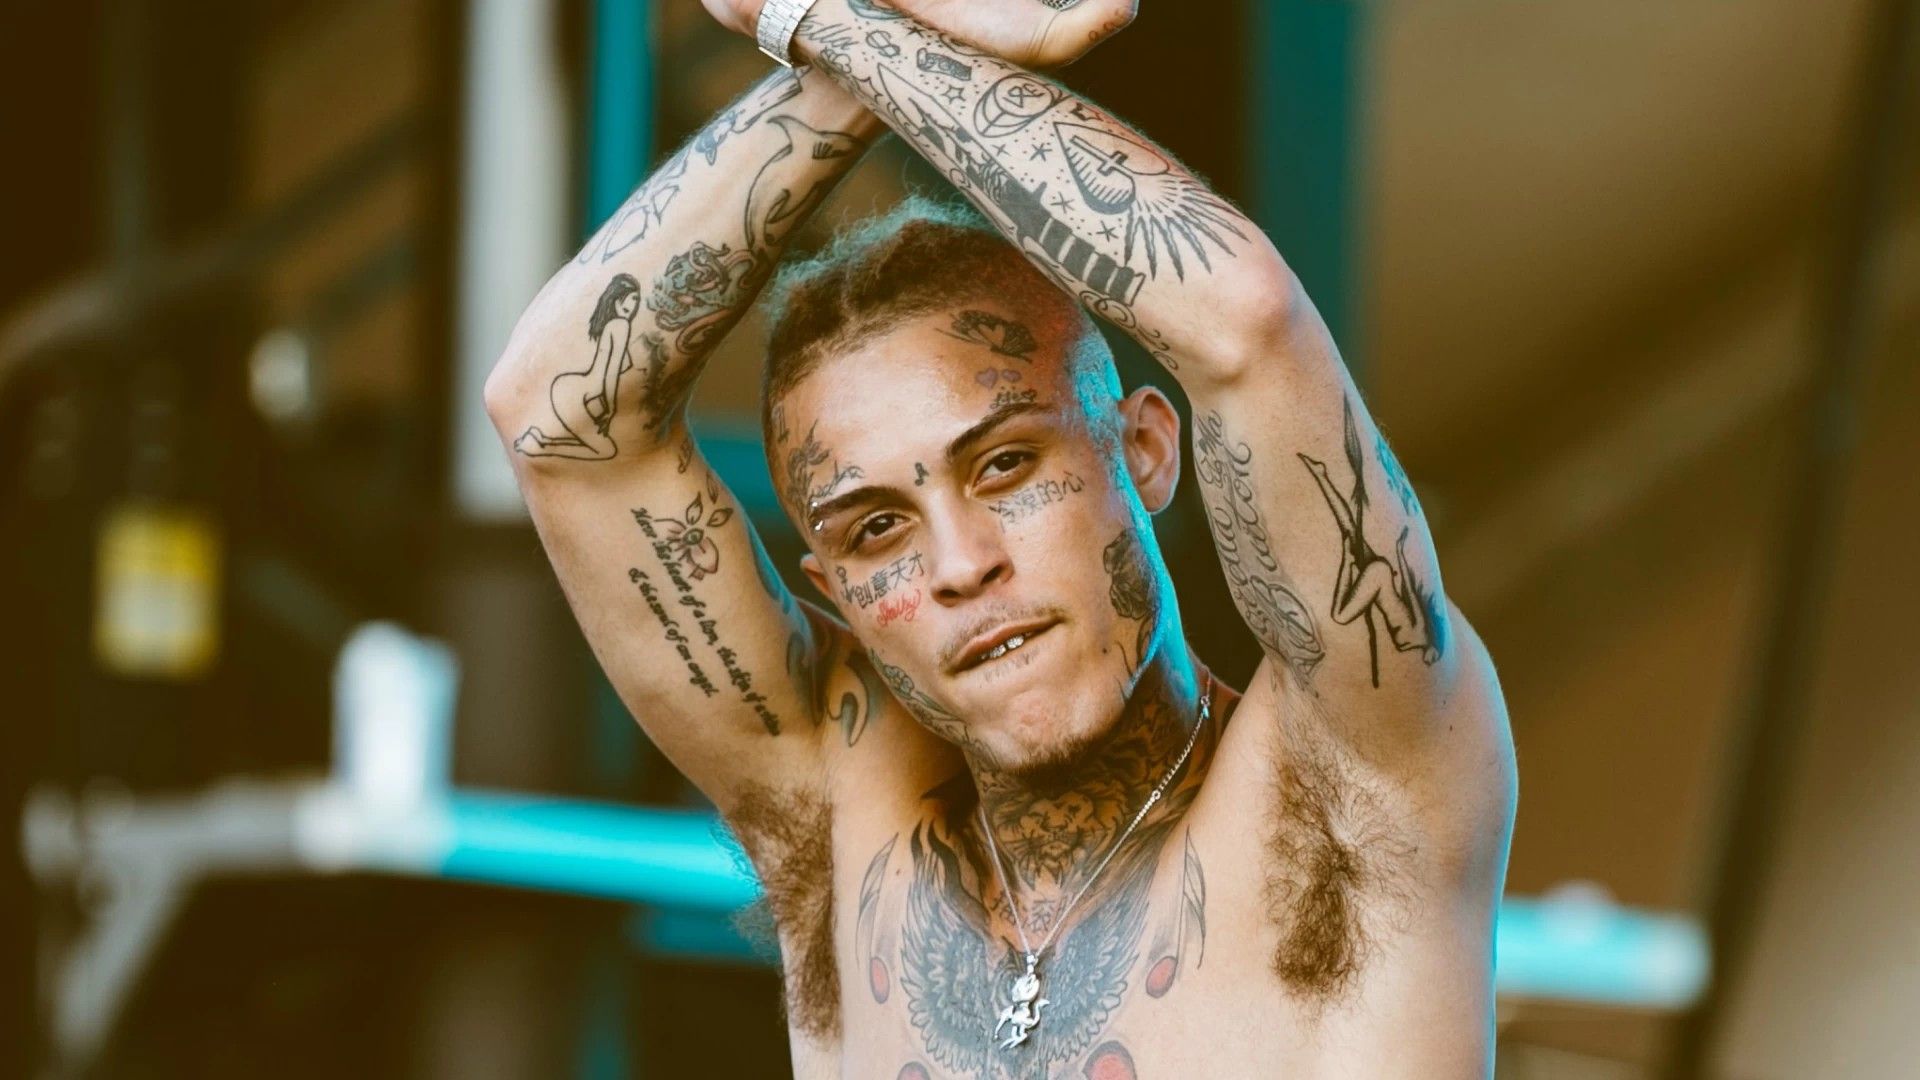 free cool Lil Skies chrome extension HD wallpaper theme tab for chrome browser!